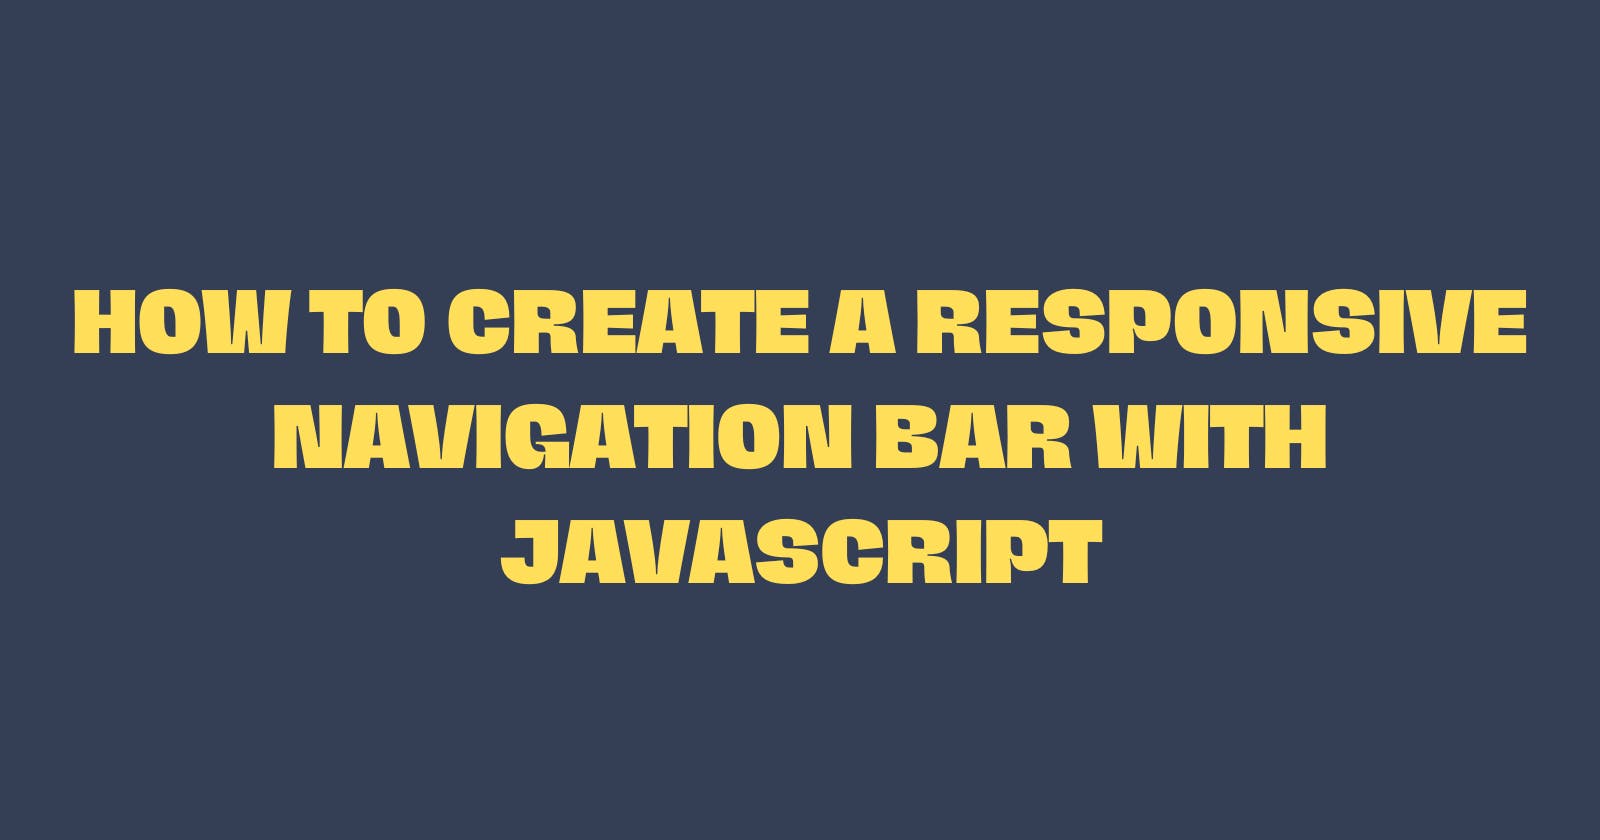 How to Create a Responsive Navigation Bar with JavaScript